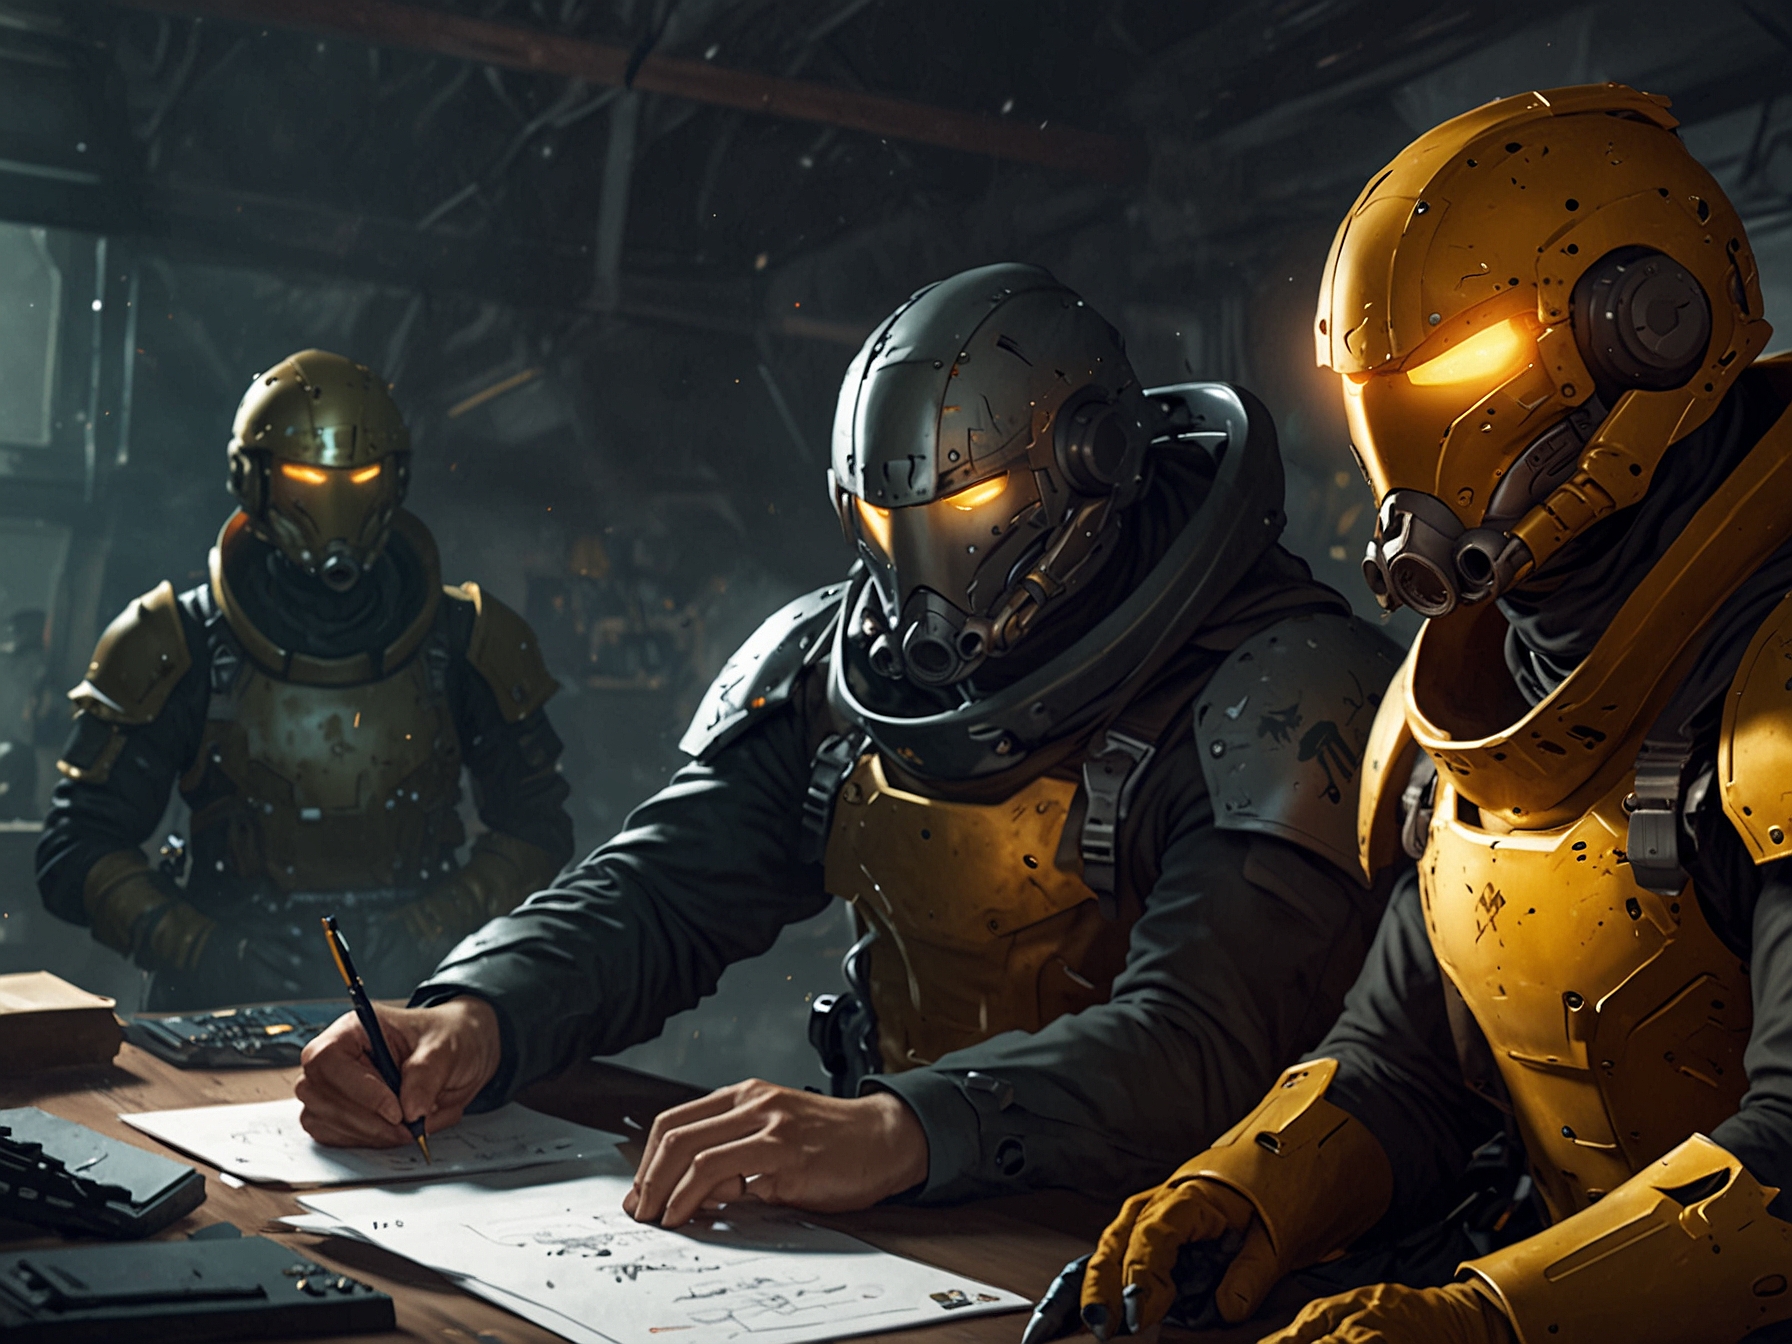 Arrowhead developers working on new content updates for Helldivers 2, showcasing their commitment to adding fresh missions, characters, and features to revive player interest.